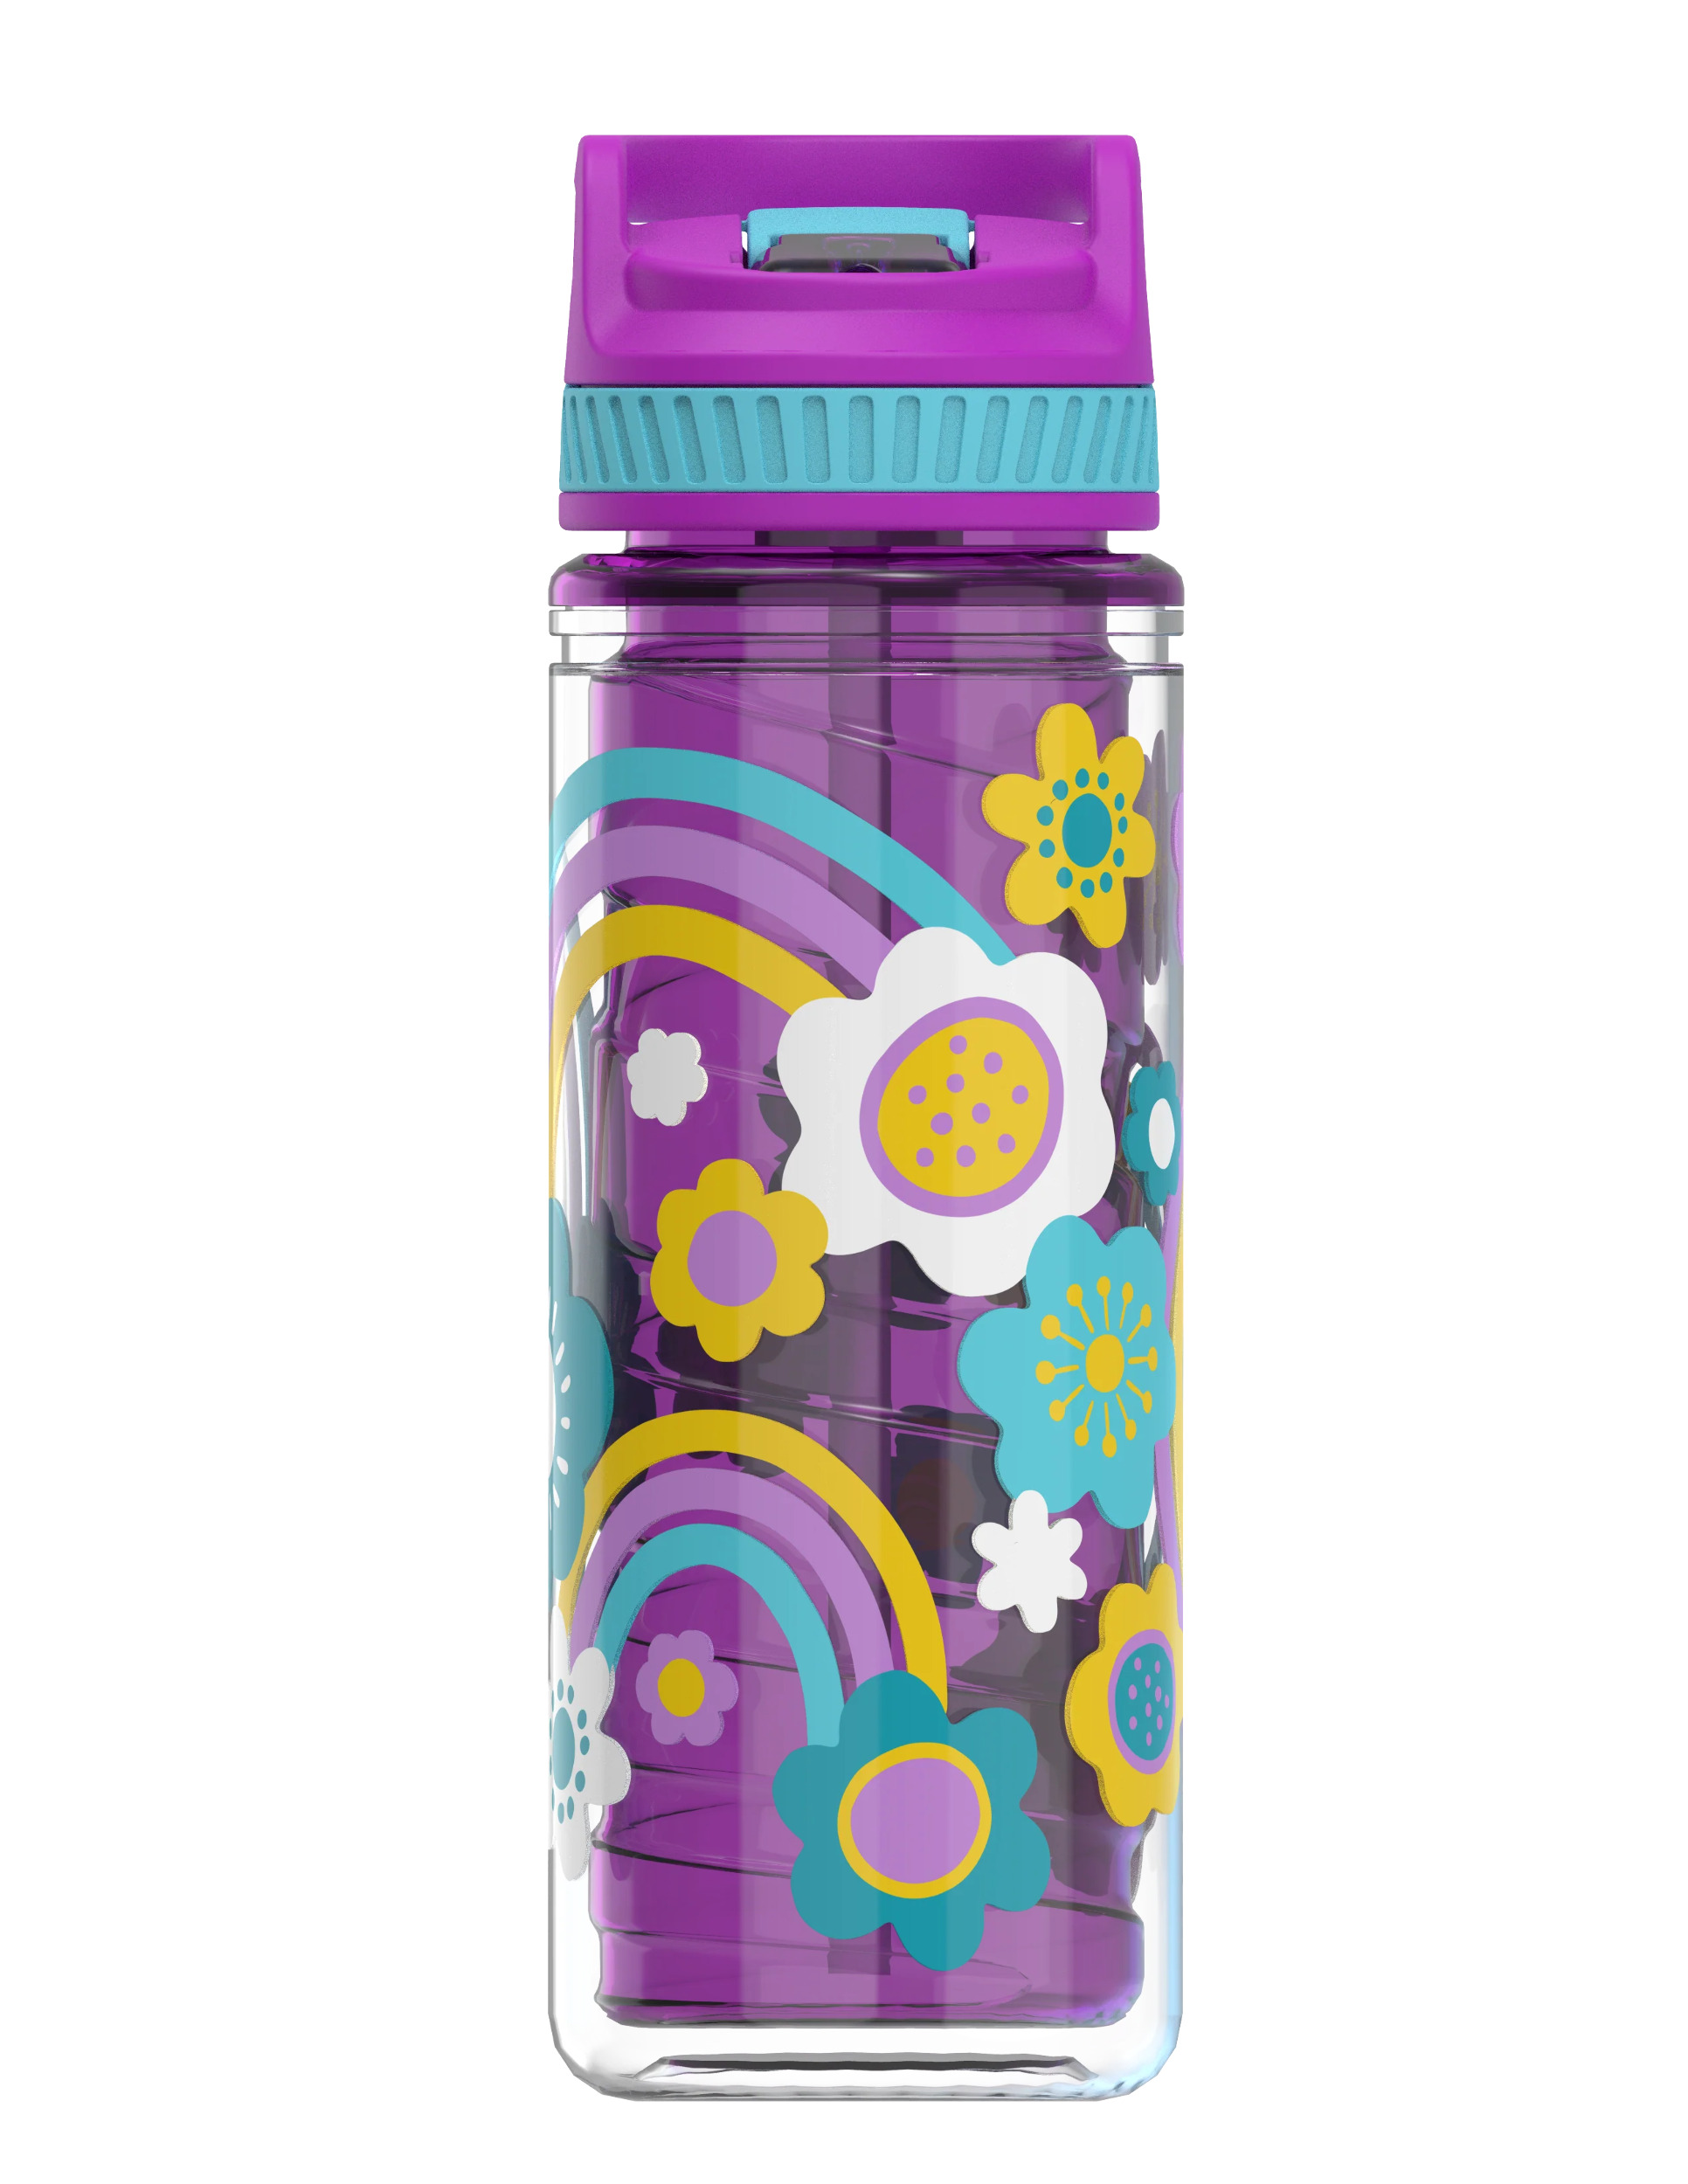 Cool Gear 2-Pack 16 oz Kid's Twist Water Bottle with Double Wall, Sipper Lid and Finger Loop Cap with Printed Design | Great for School, Sports, Outdoors, and More - Be Kind/ Flowers - image 3 of 3